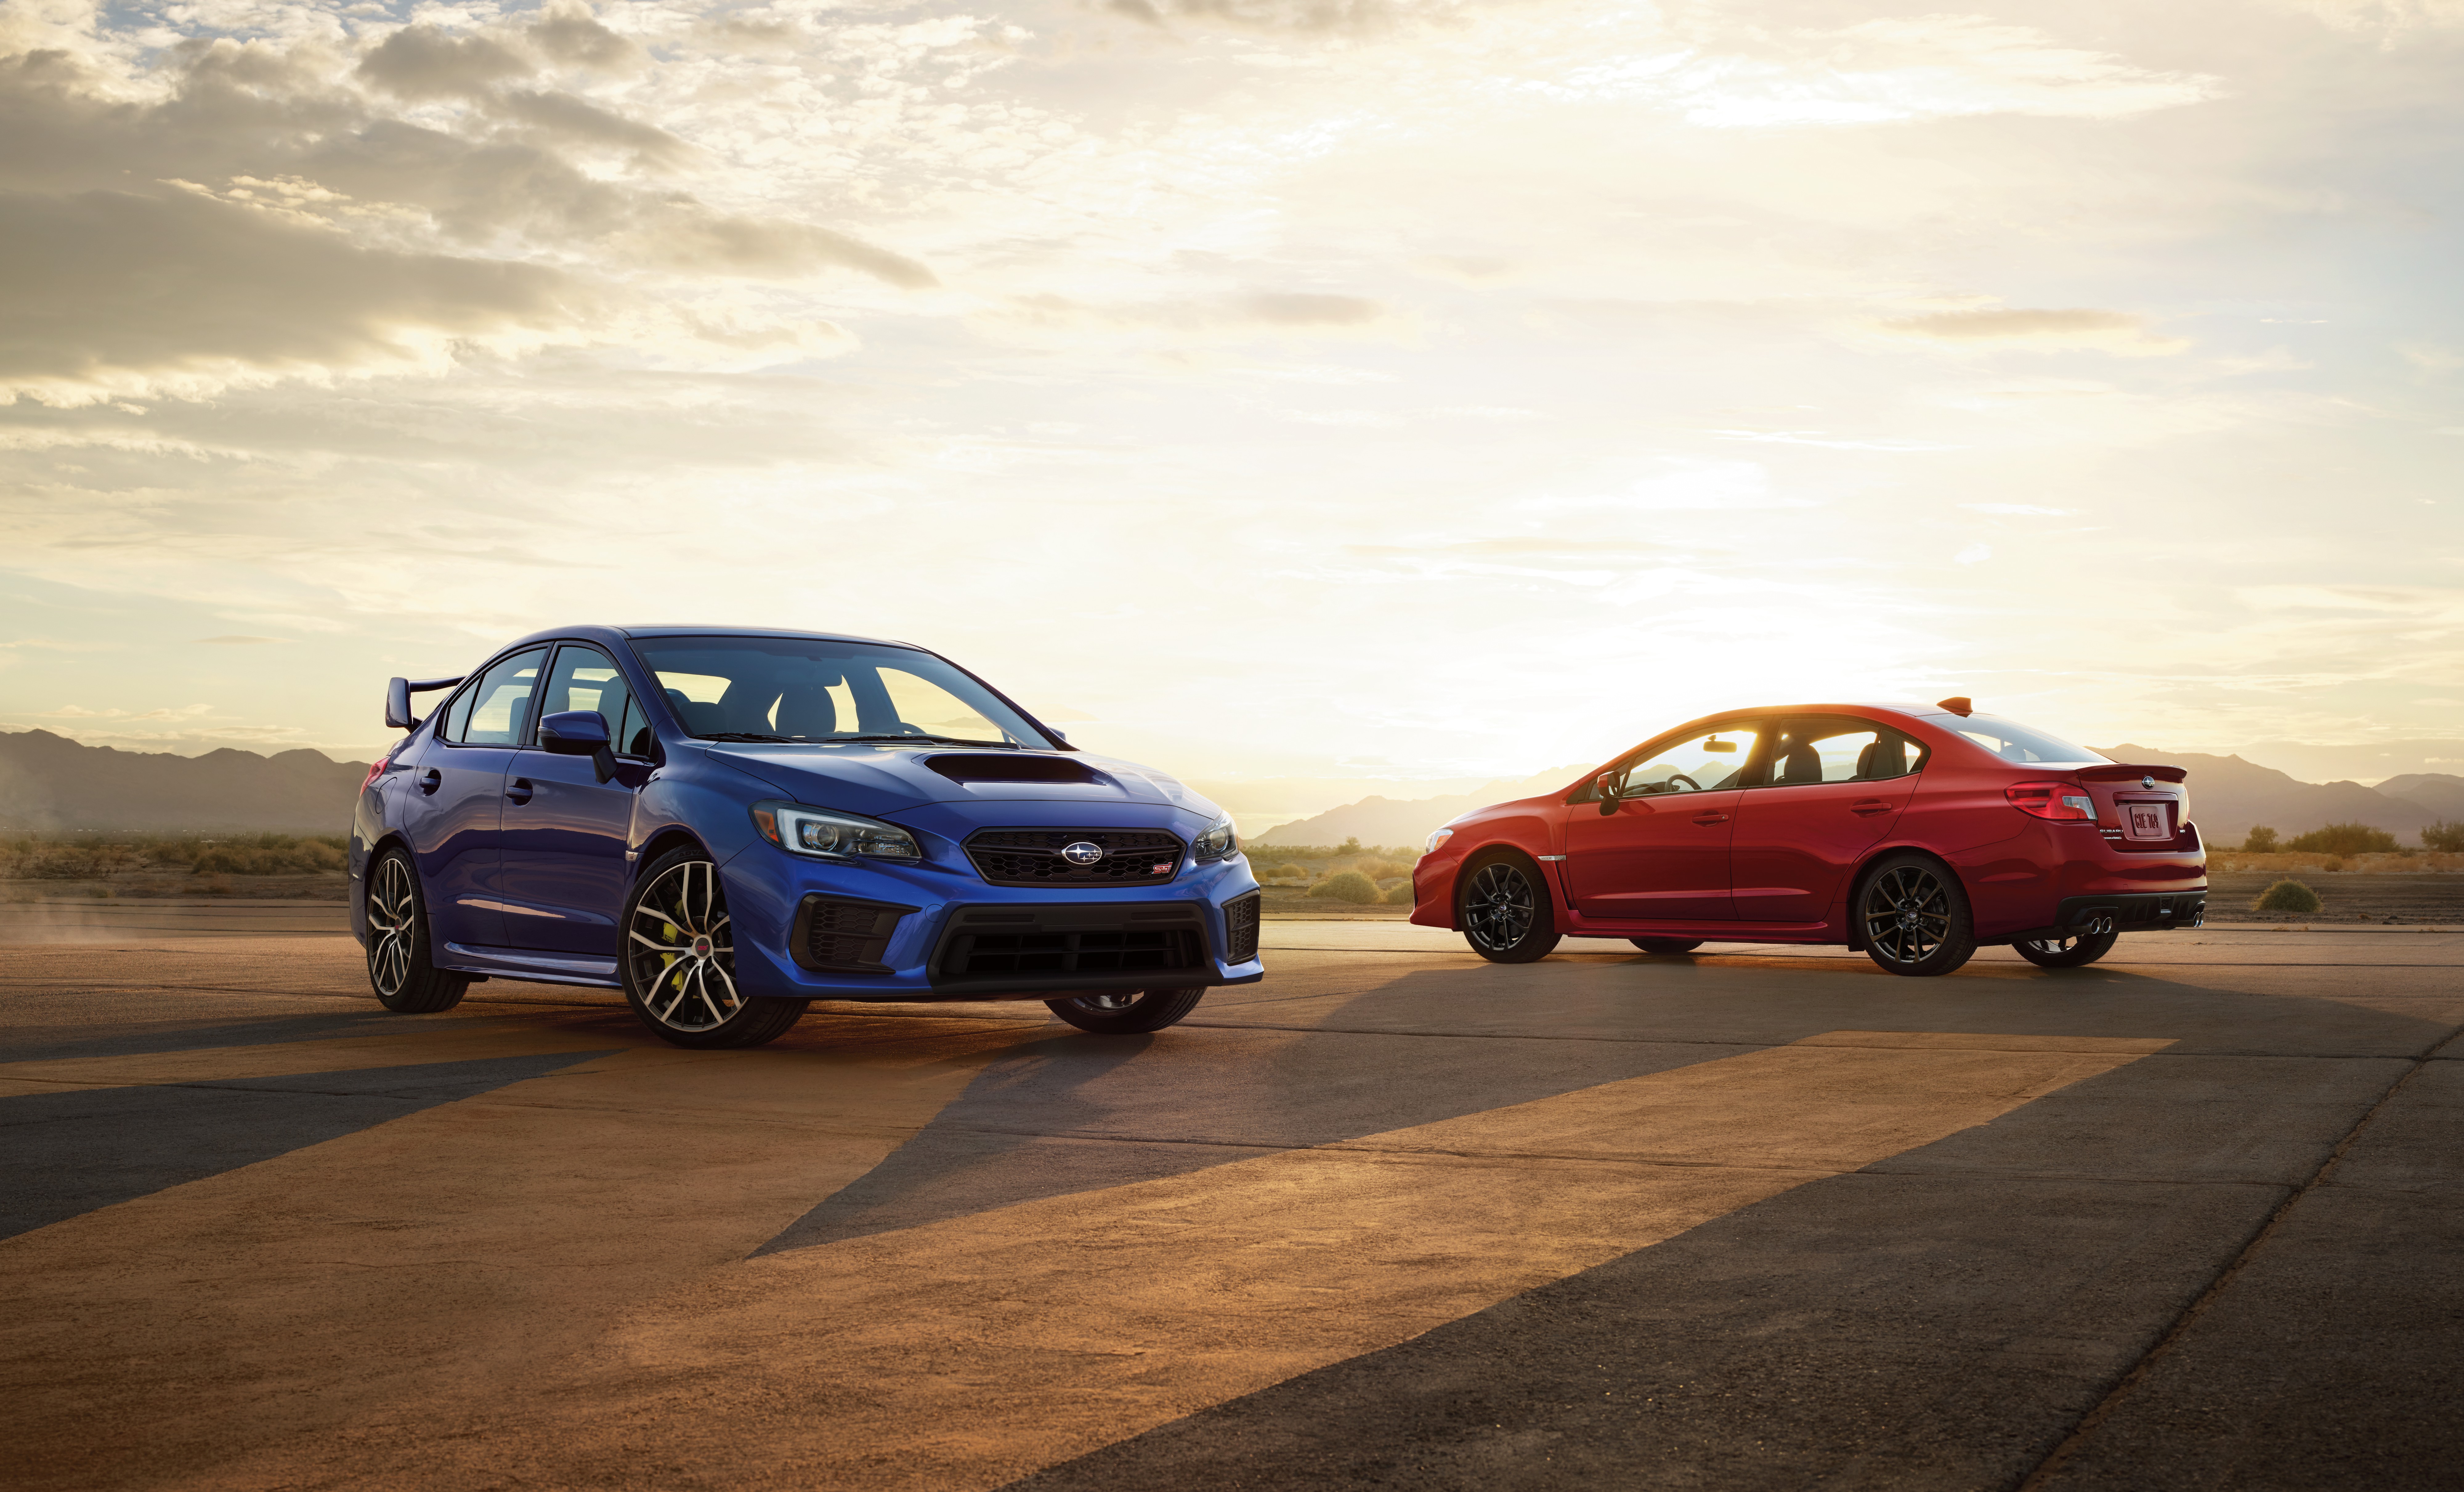 Subaru WRX STI Not Planned for New Model; Future May Feature Electrification